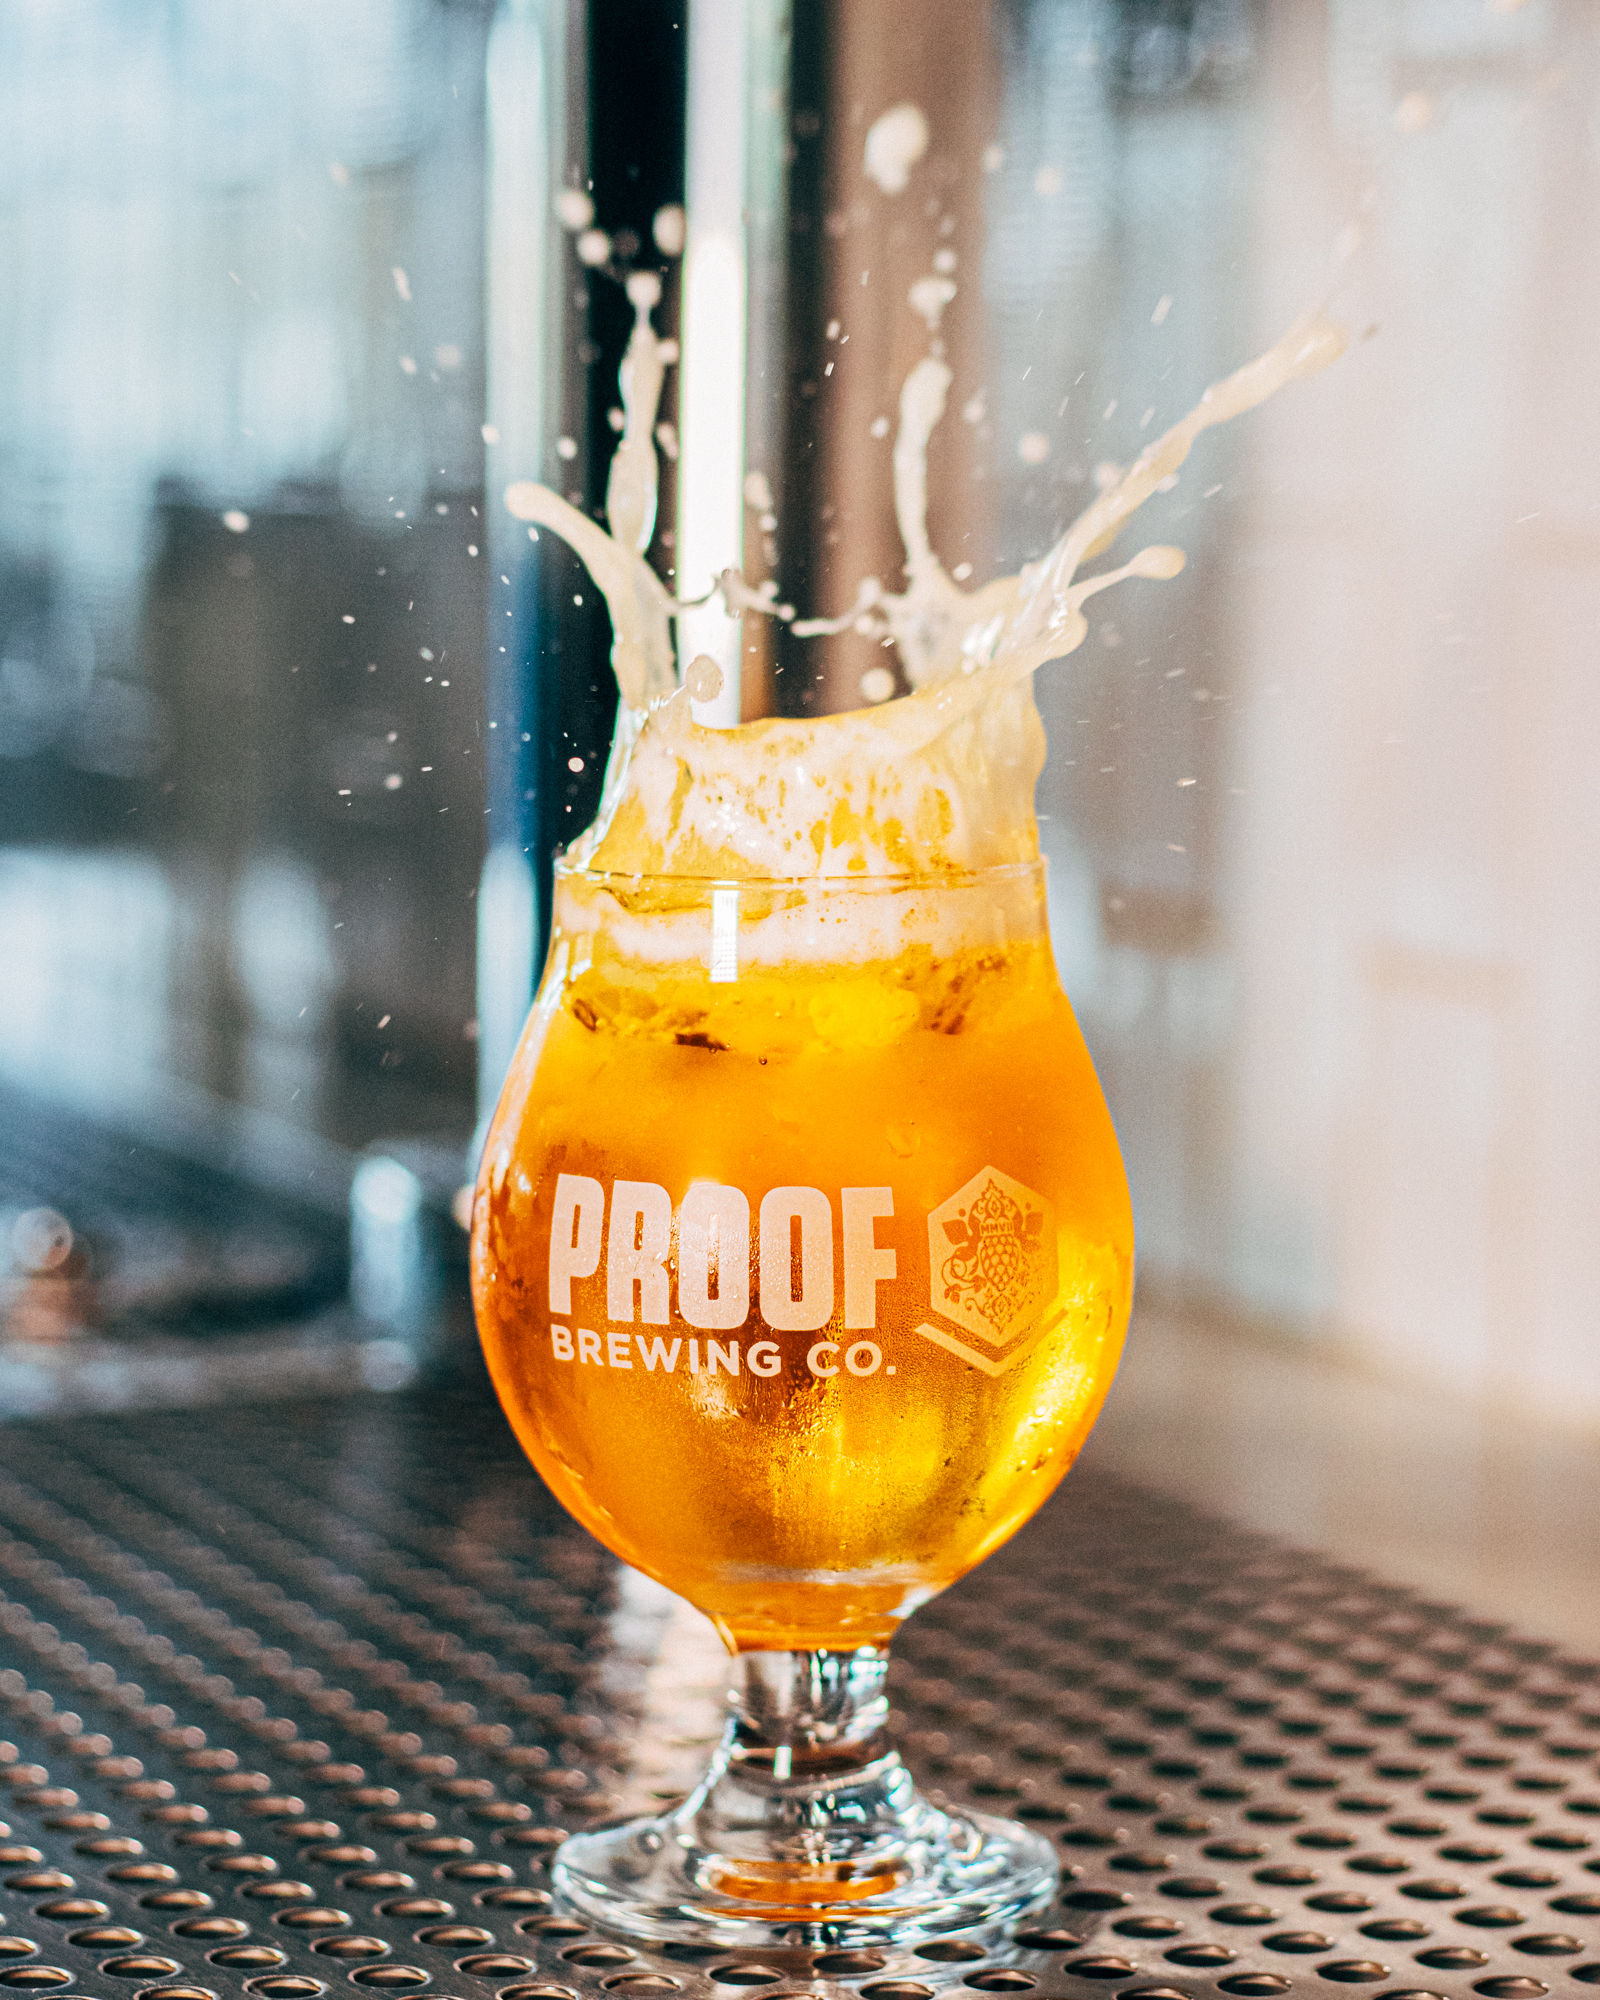 Proof Brewing Co.